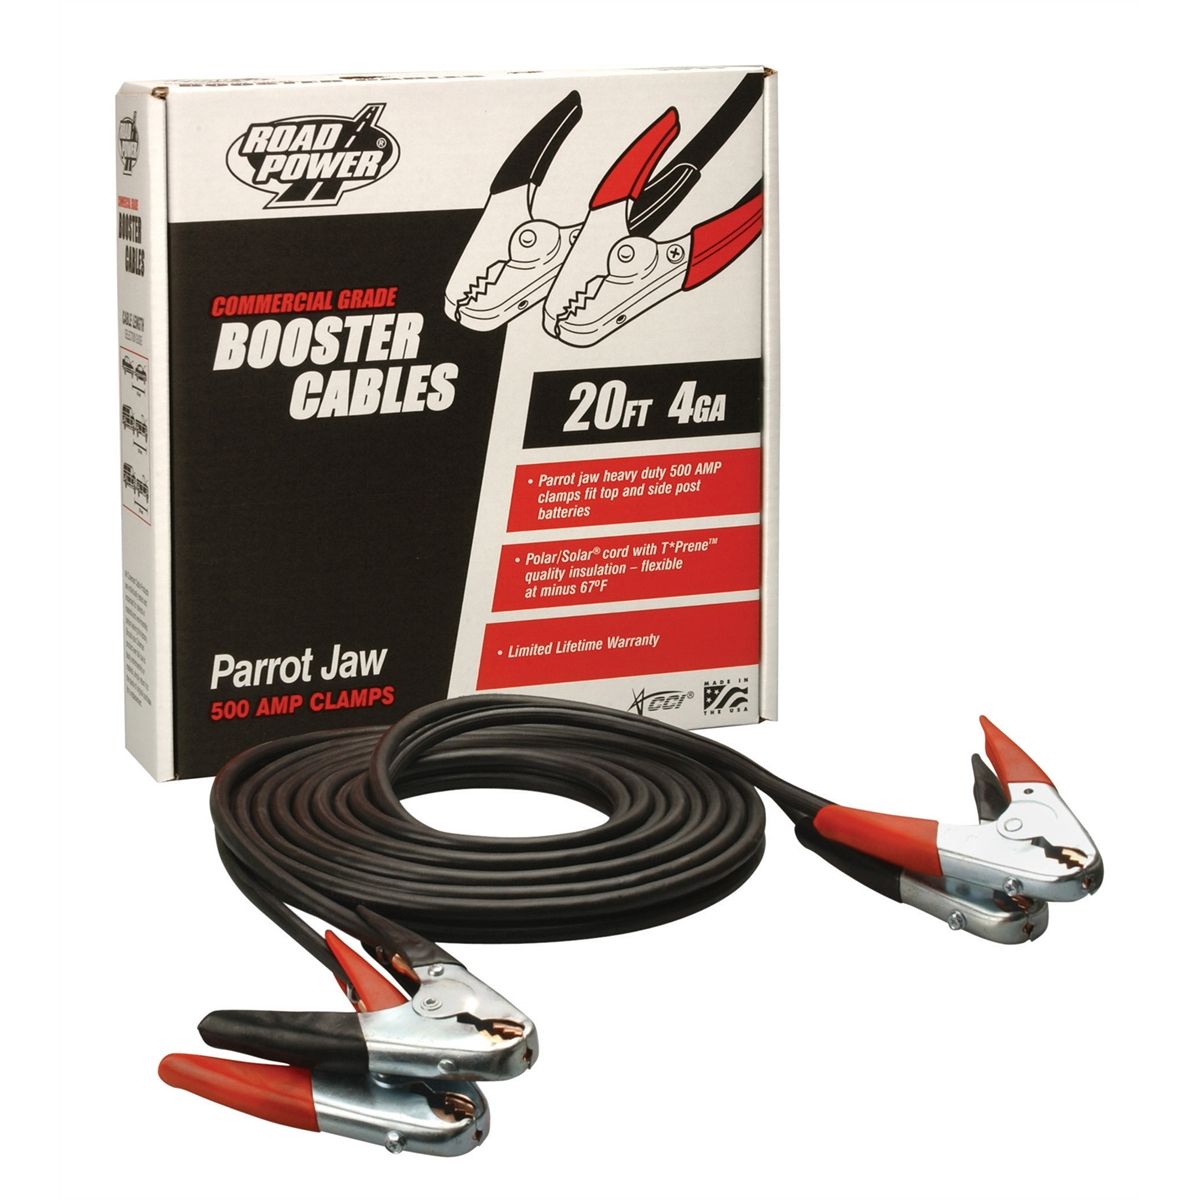 z-nla 4 Gauge, 20 Foot Booster Cables w/ Parrot Jaw Clamp